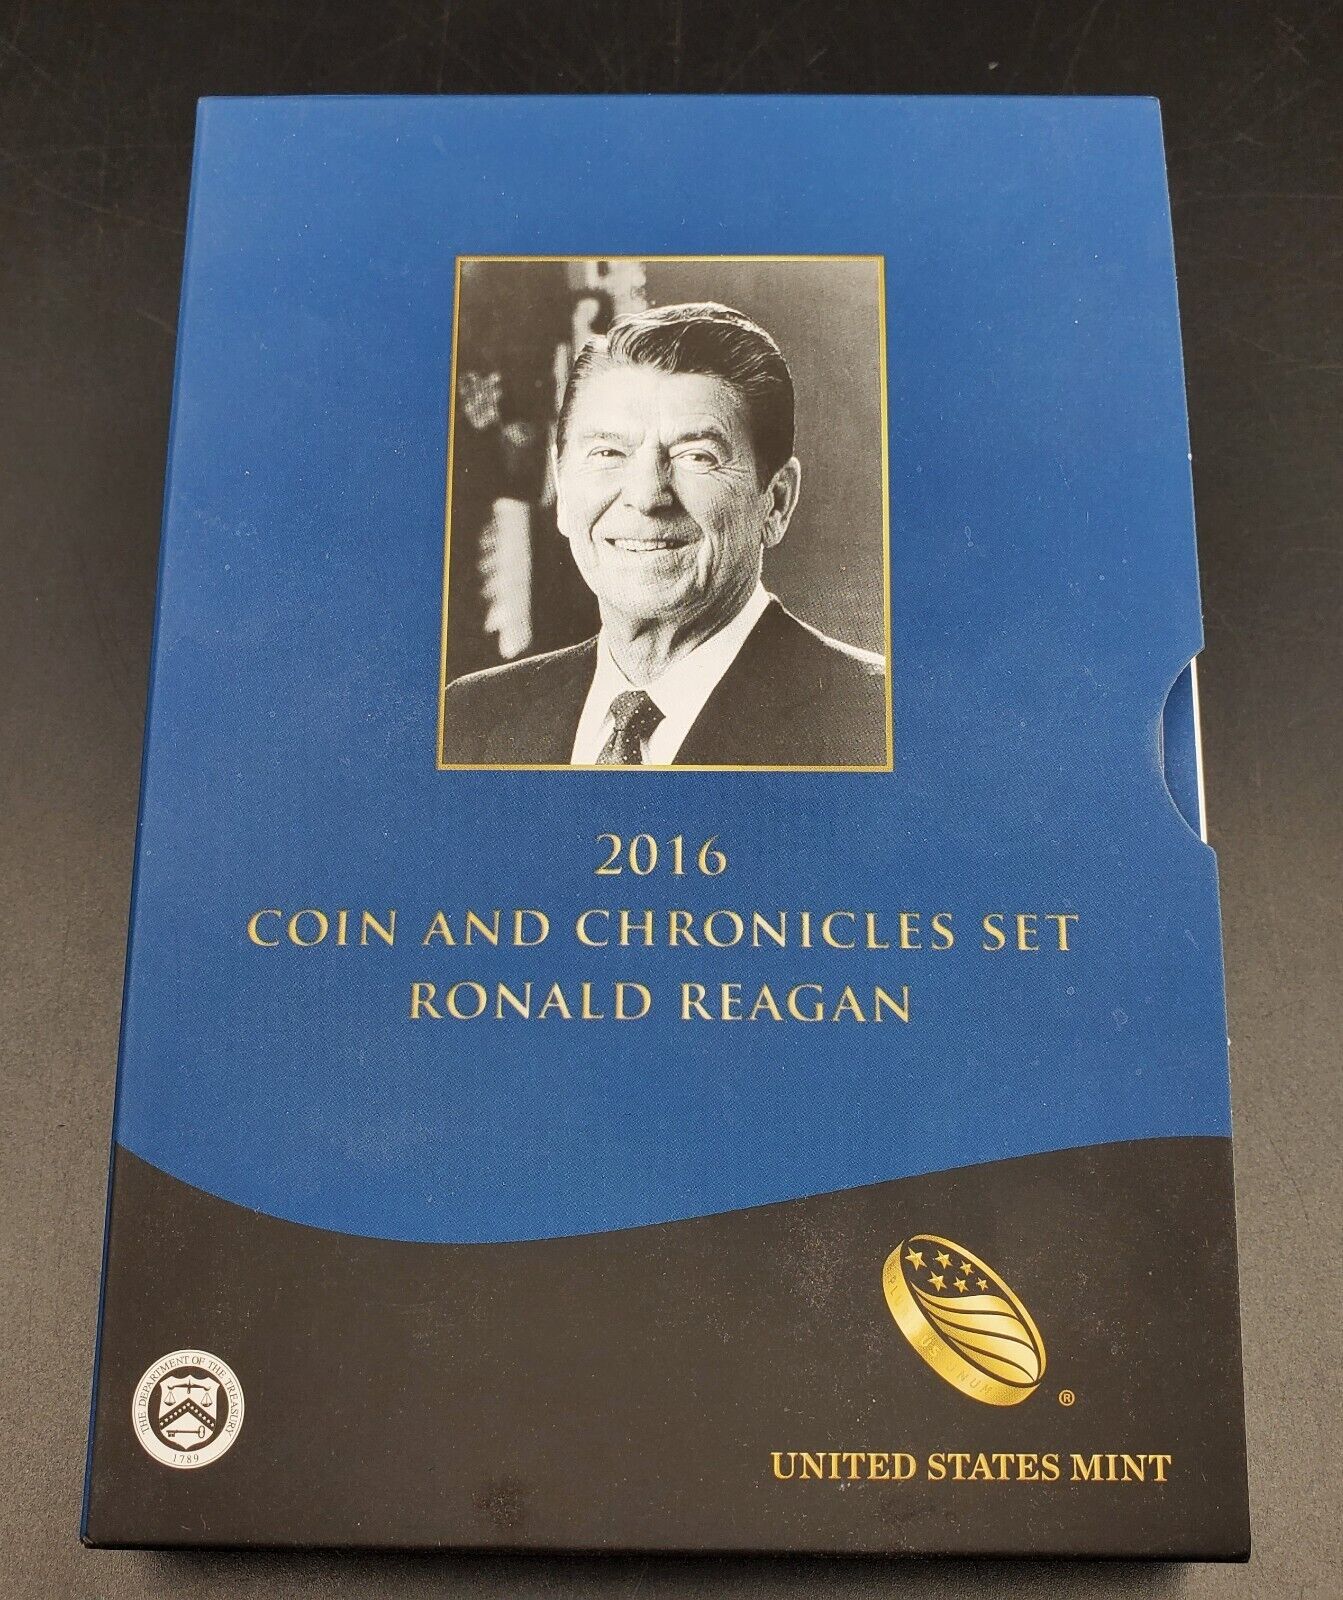 2016 Ronald Reagan Coin and Chronicles Set OGP US Mint w/ Proof Silver Eagle